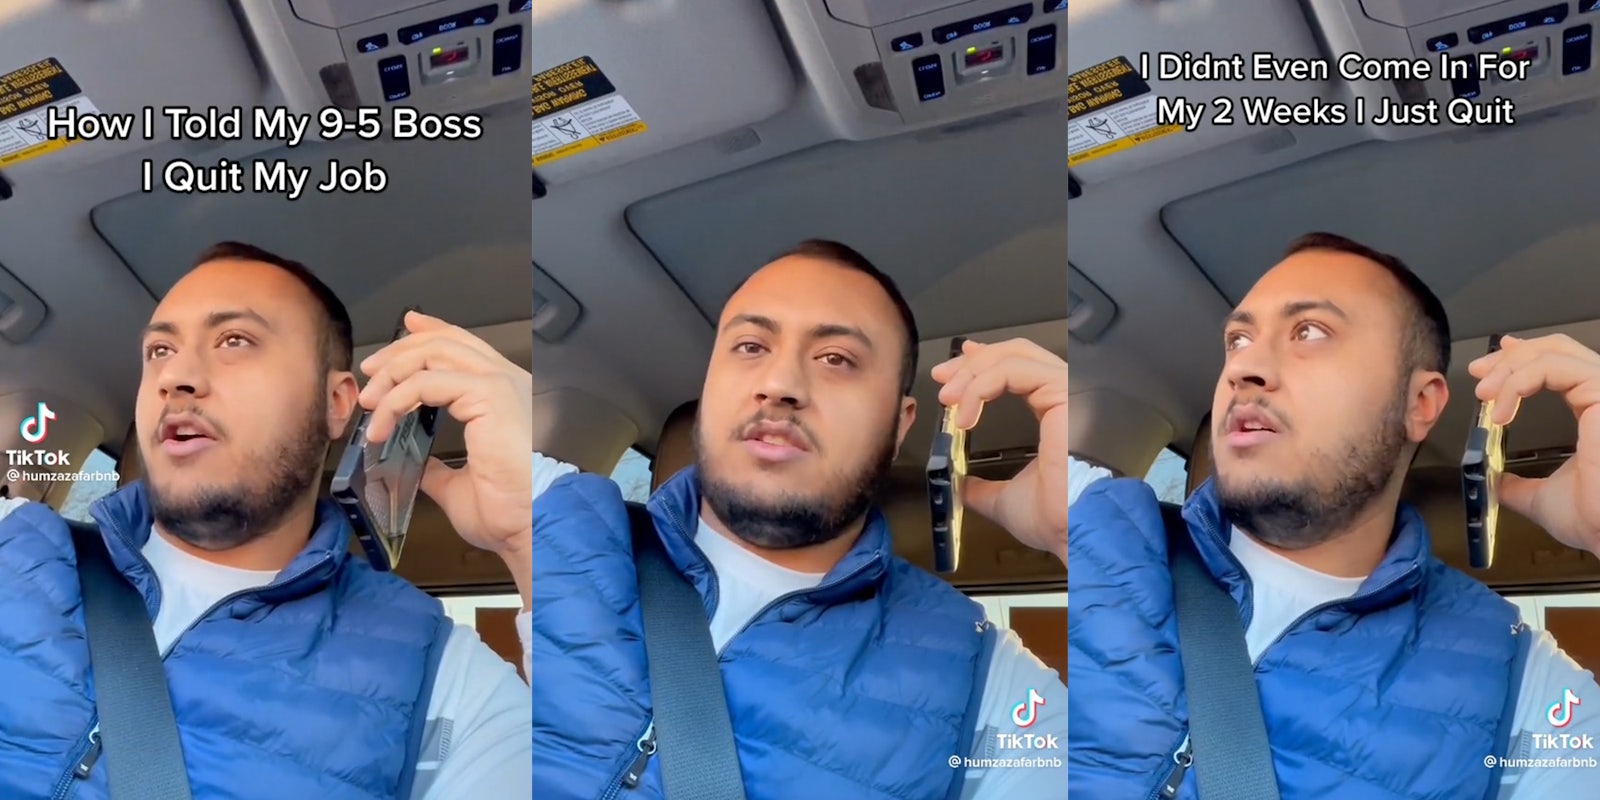 man on phone in car with captions 'How I told my 9-5 boss I quit my job' and 'I didn't even come in for my 2 weeks I just quit'